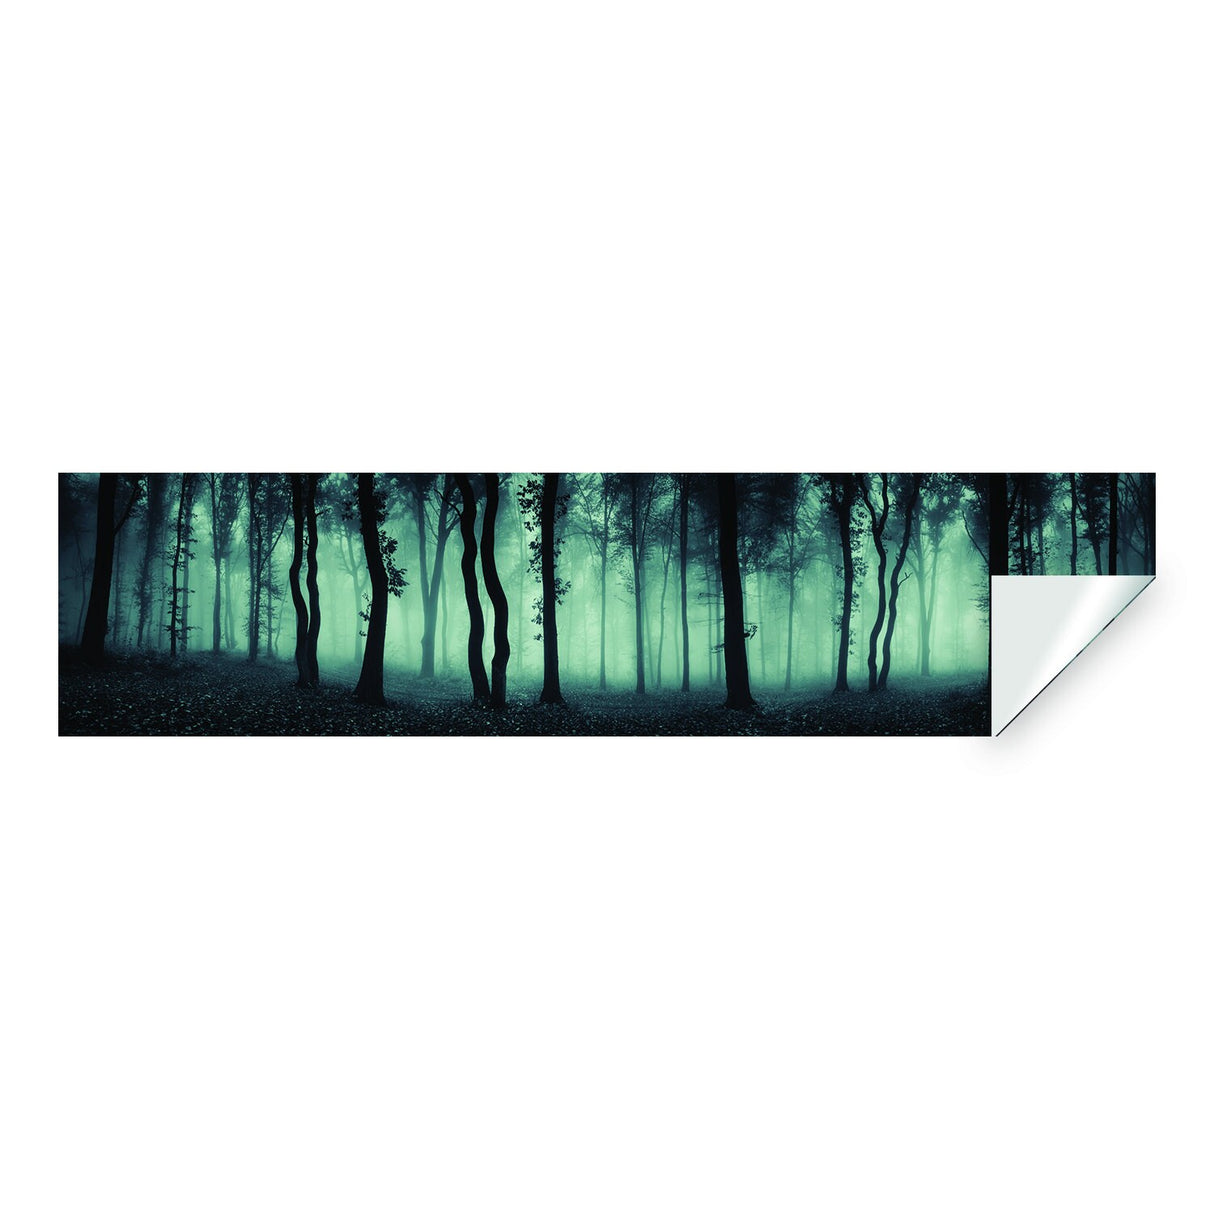 Foggy Forest Wallpaper Sticker Mural - Night Tree Fog Removable Wall Paper Art Decal